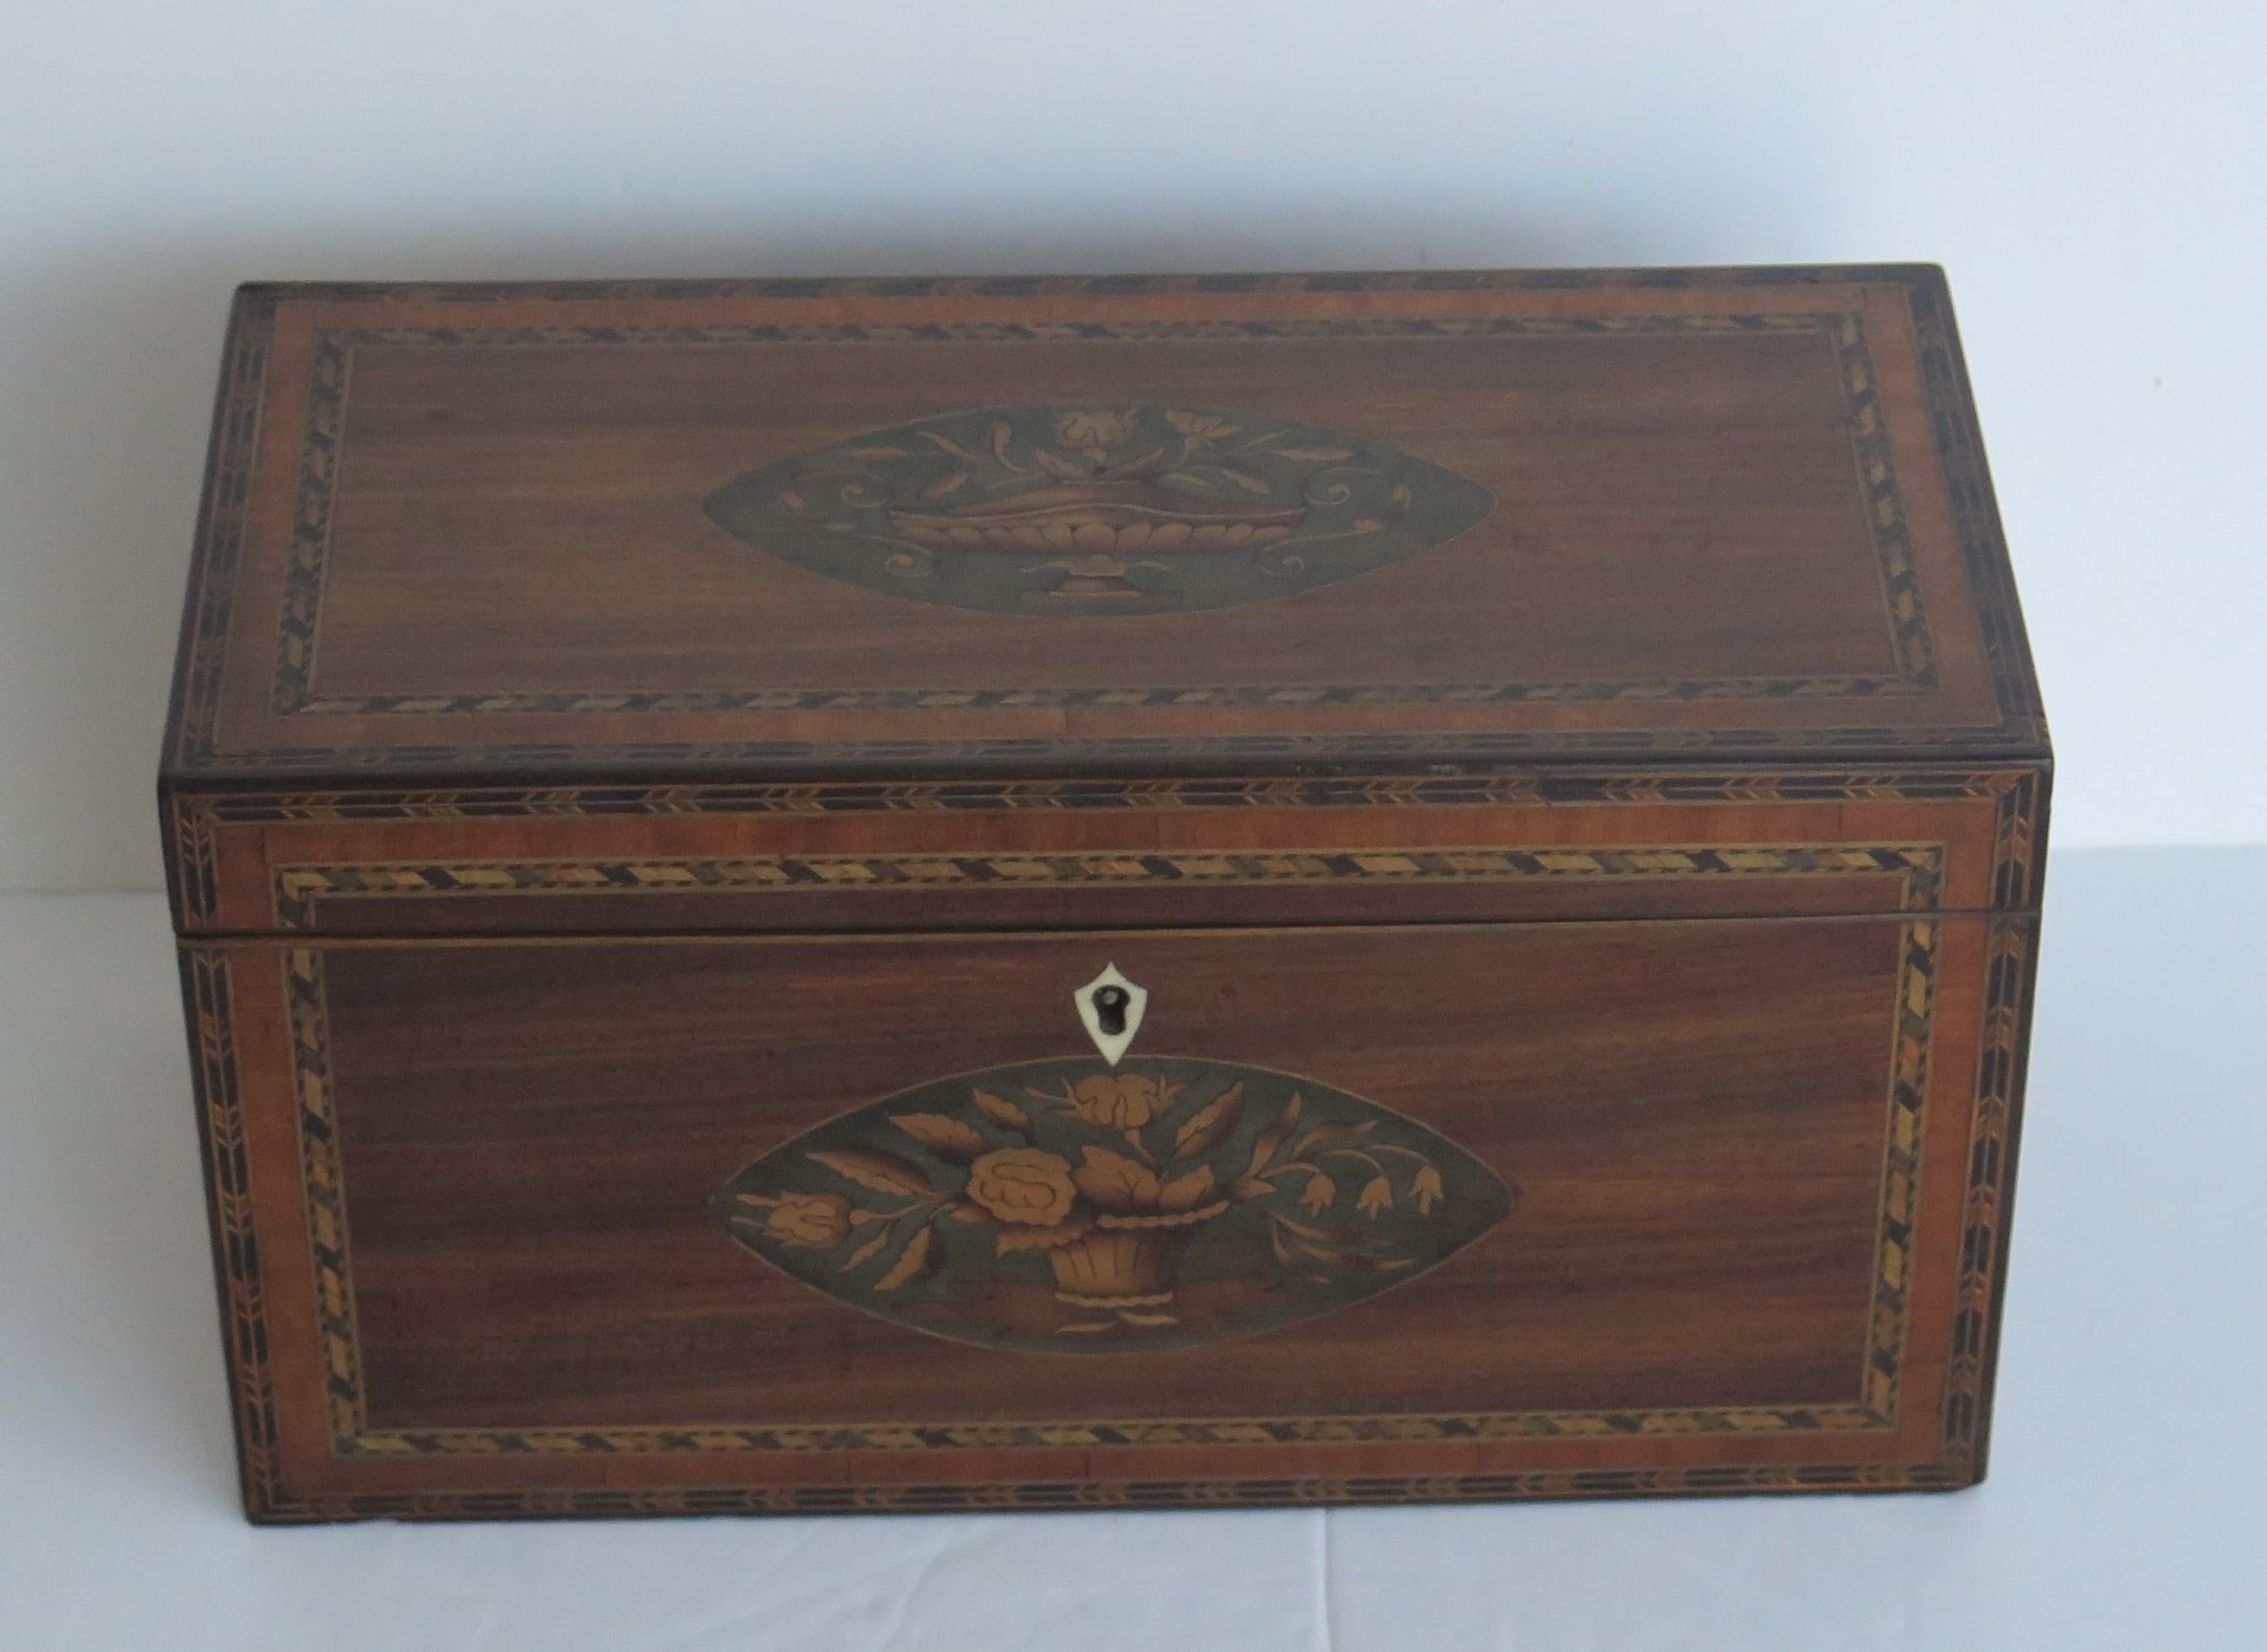 A very beautiful, fine quality, inlaid tea caddy from the English Georgian, Sheraton Period, Circa 1785.

The tea caddy is all handmade with very fine quality features;
* Beautifully chosen figured mahogany.
* Exceptional inlays of Shells and patera